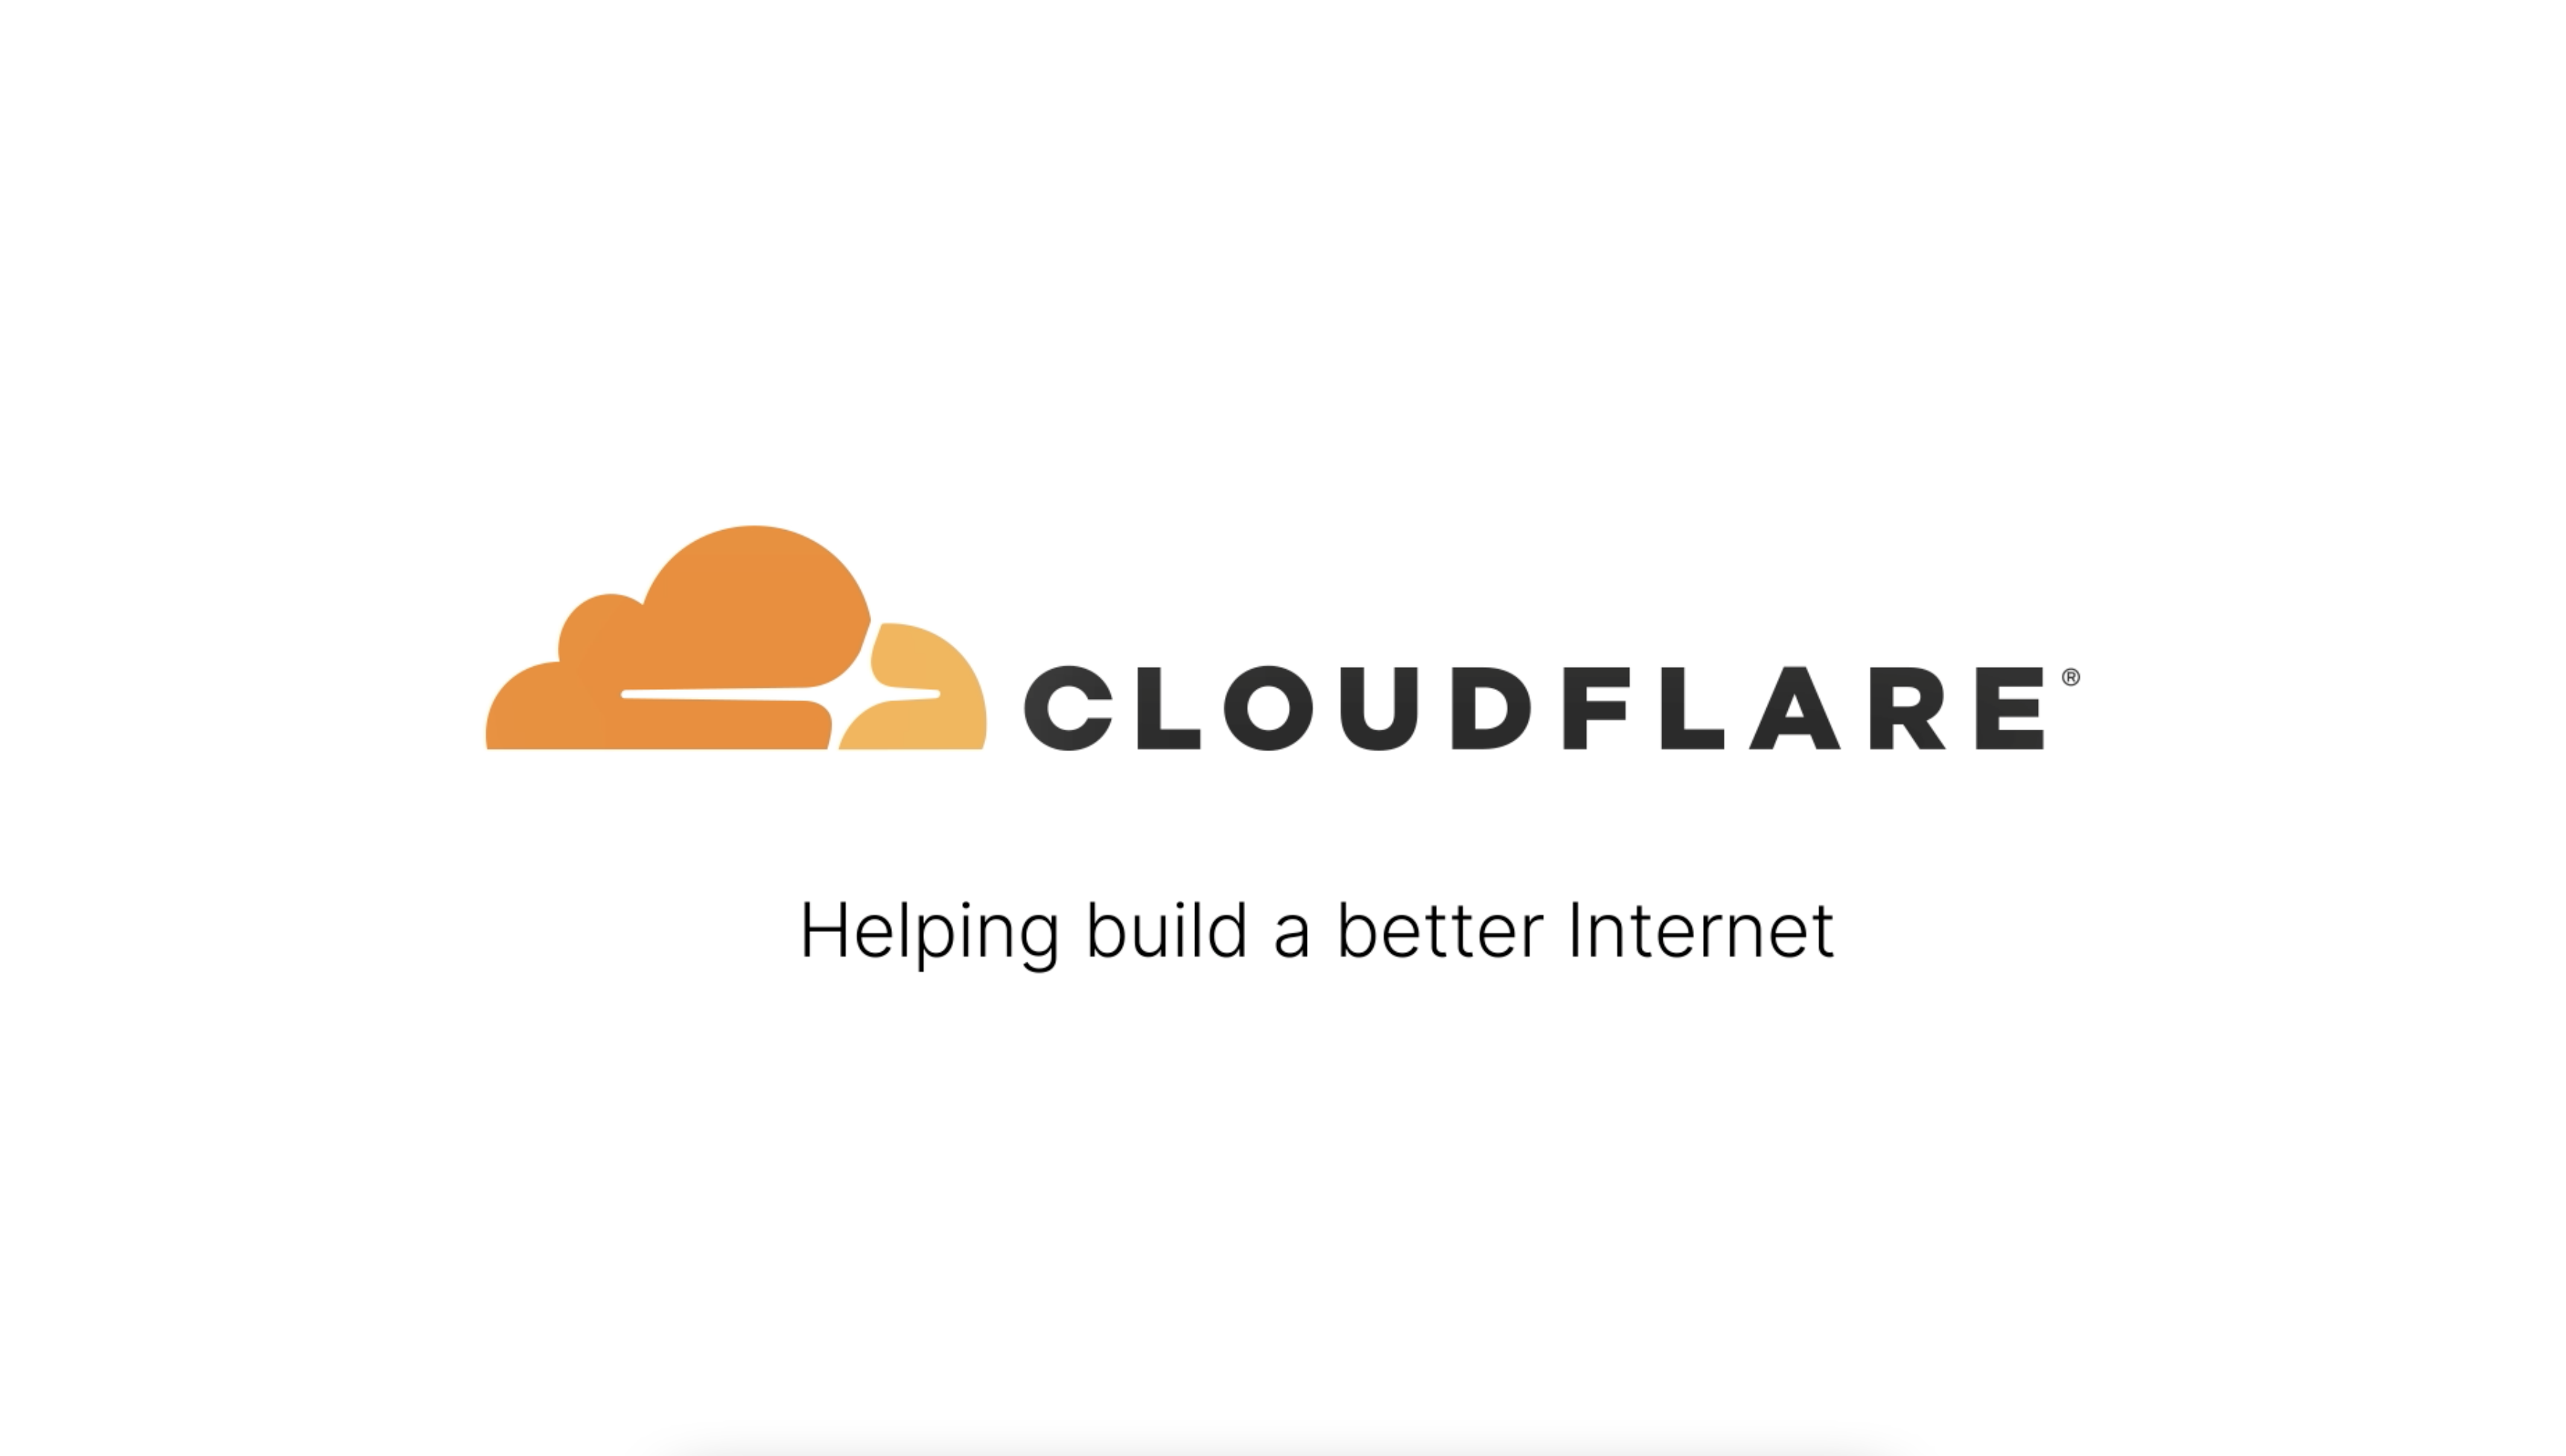 Why Cloudflare? Cloudflare